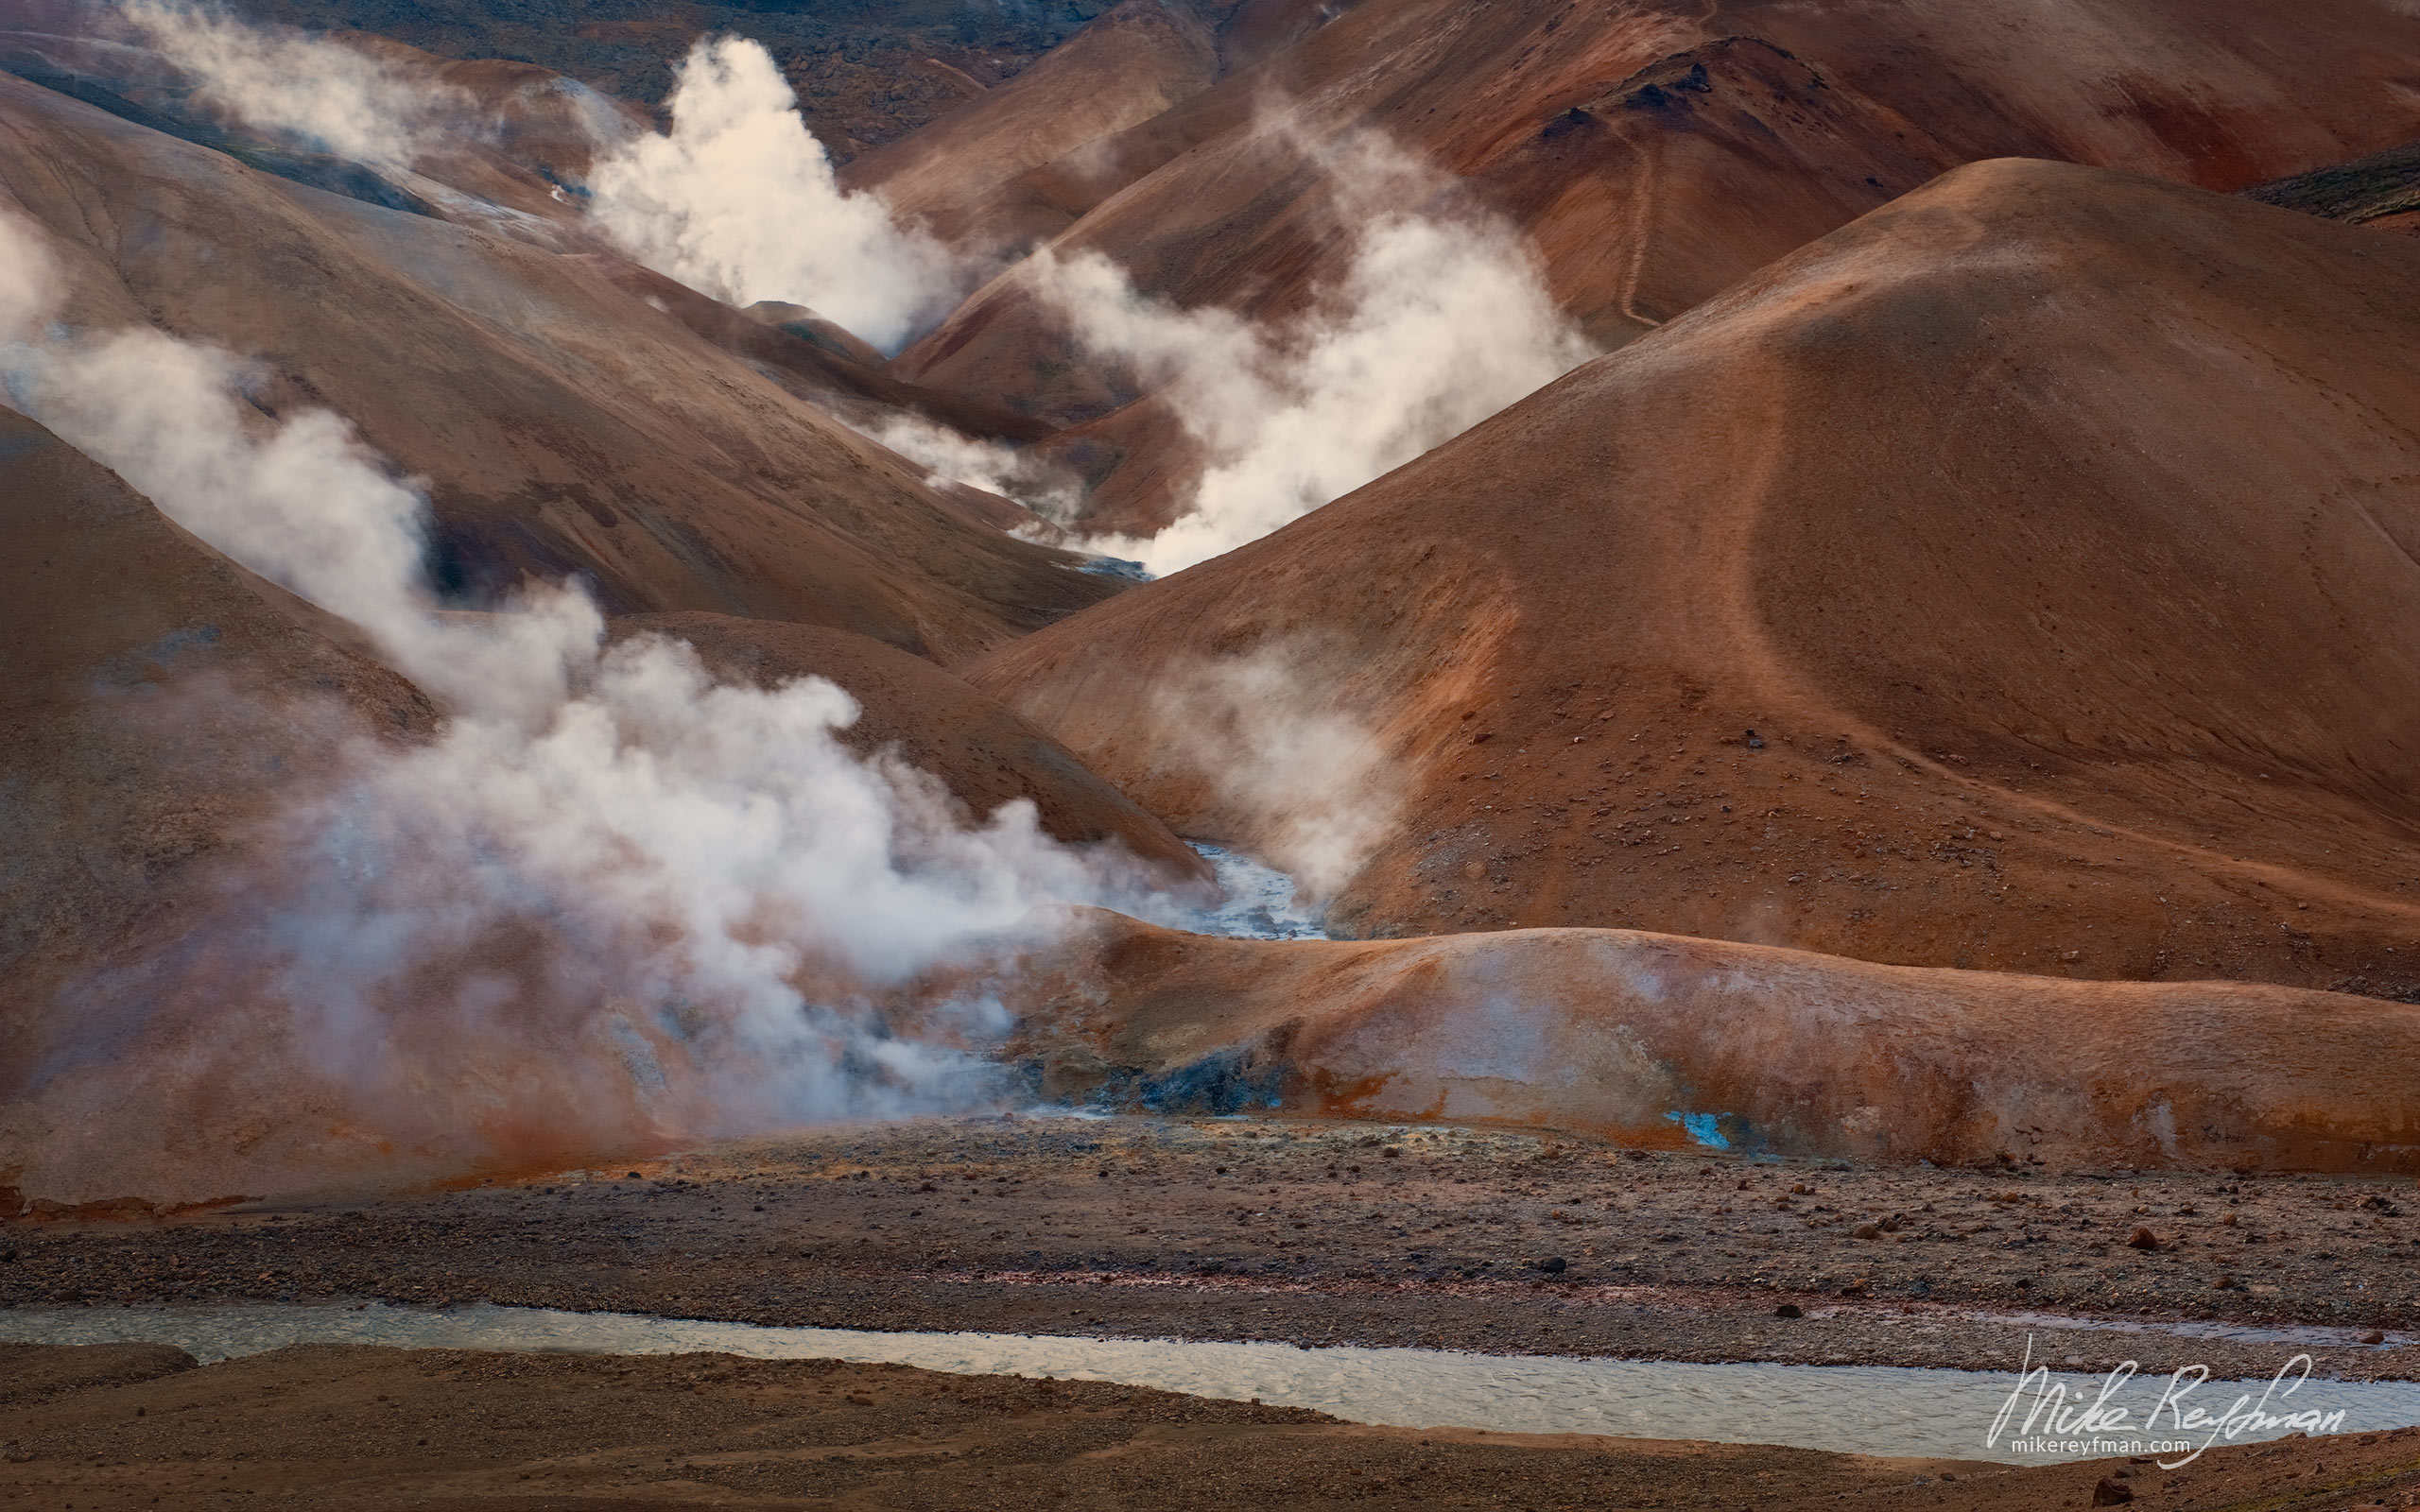 Hveradalir Geothermal area in the Kerlingarfjoll ?ountains. Central Highlands, Iceland. 122-IC-GP _MR28980 - Rhyolite Mountains, Crater Lakes, Geothermal Areas, Lava Fields and Glacial Rivers. Iceland.  - Mike Reyfman Photography